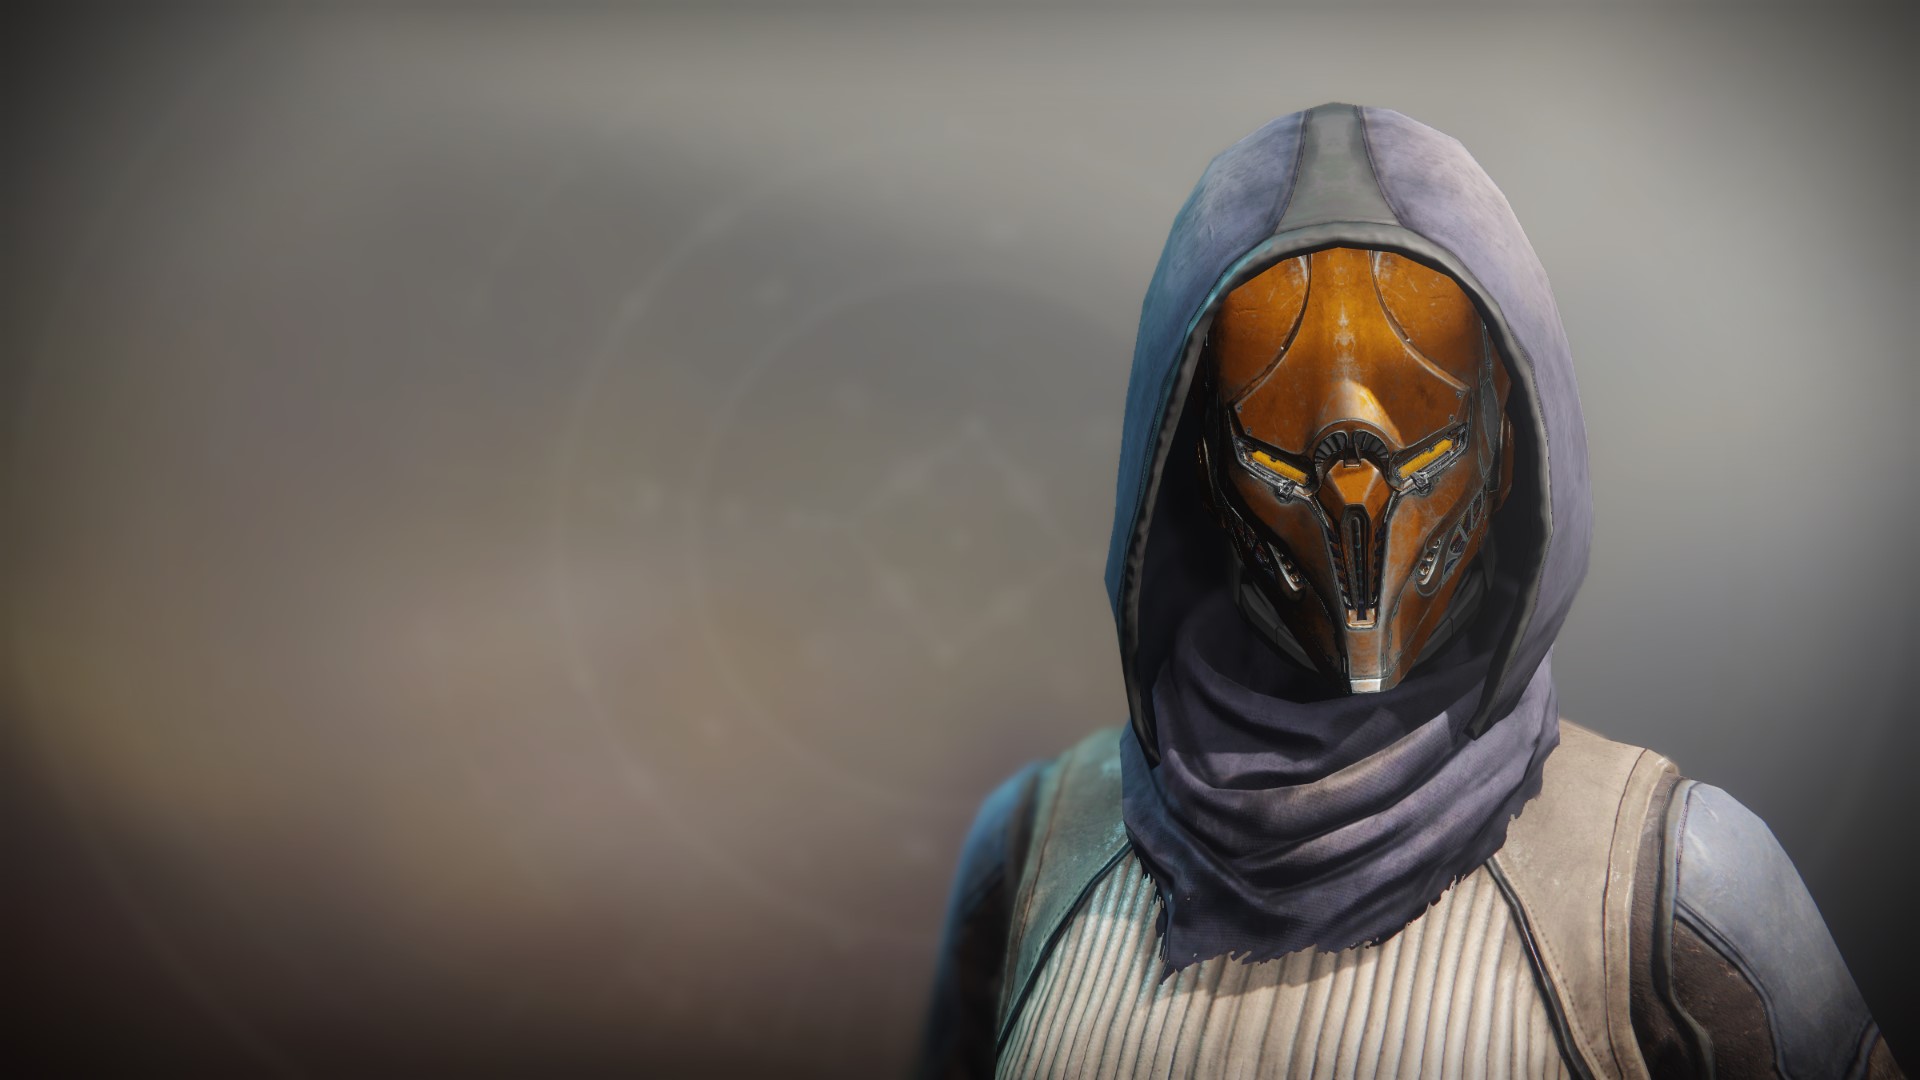 An in-game render of the Shadow's Mask.